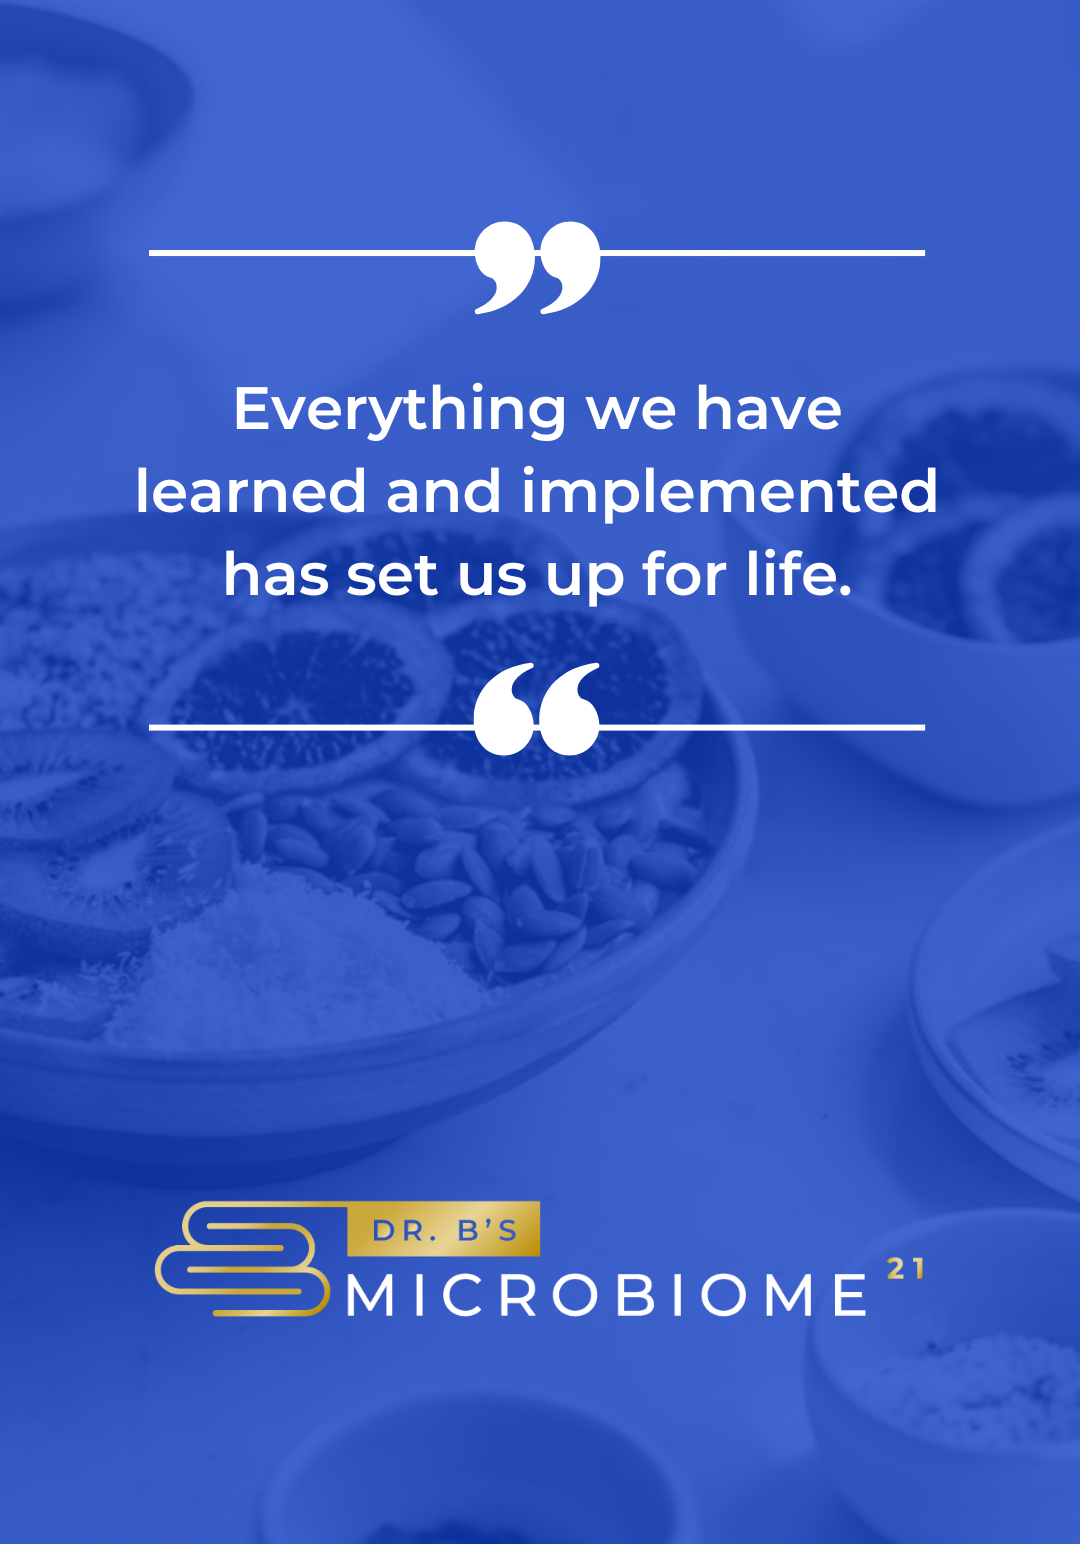 microbiome quote